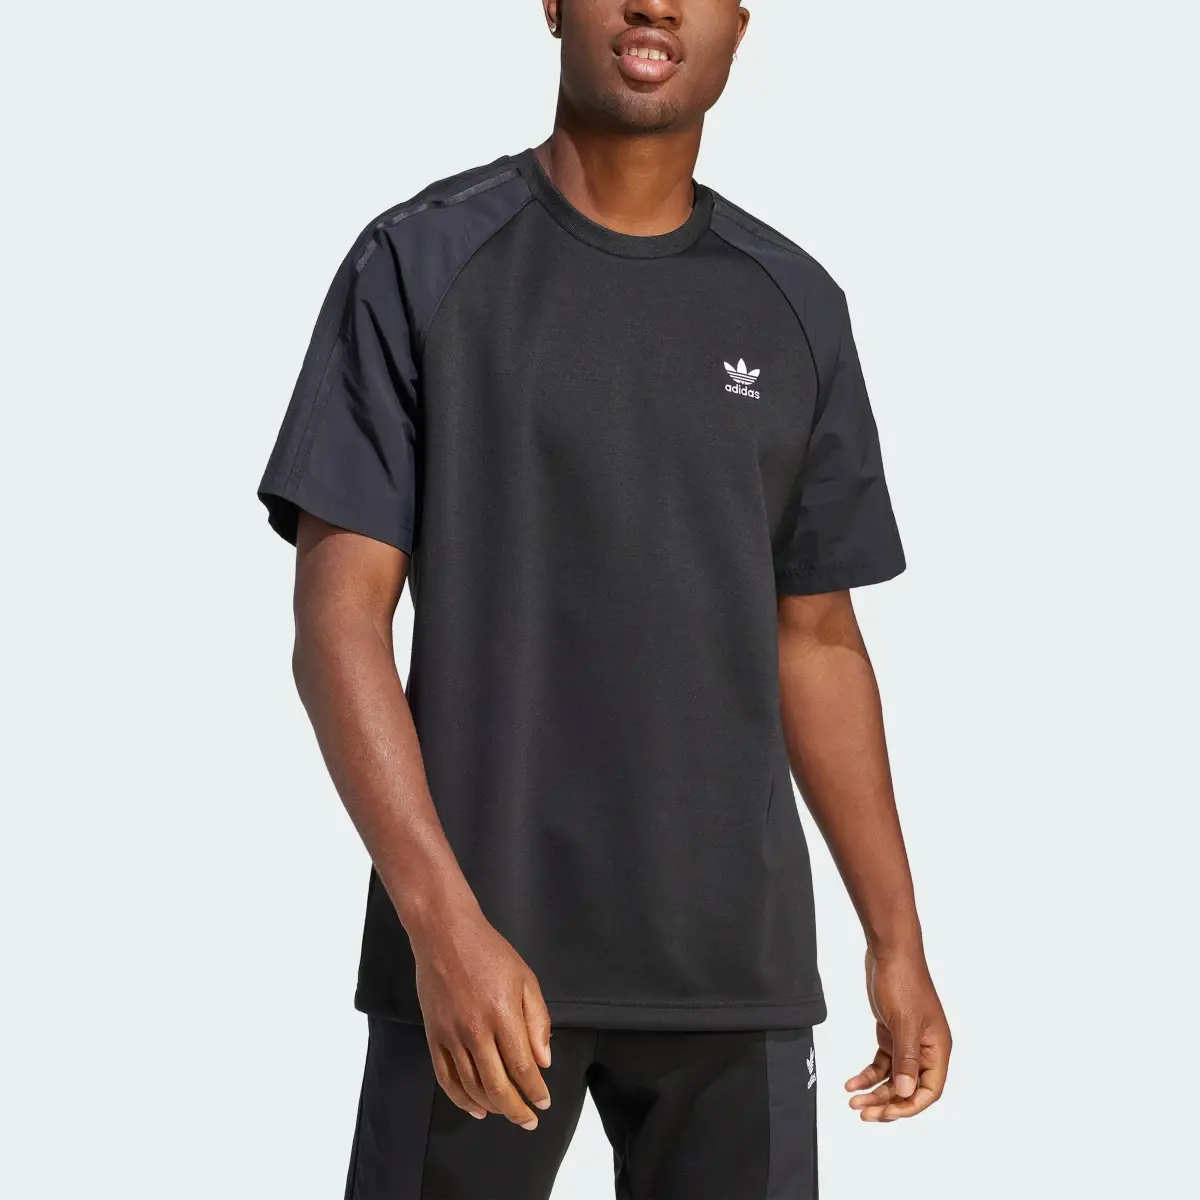 Adidas Adicolor Re-Pro SST Material Mix Tee. 1